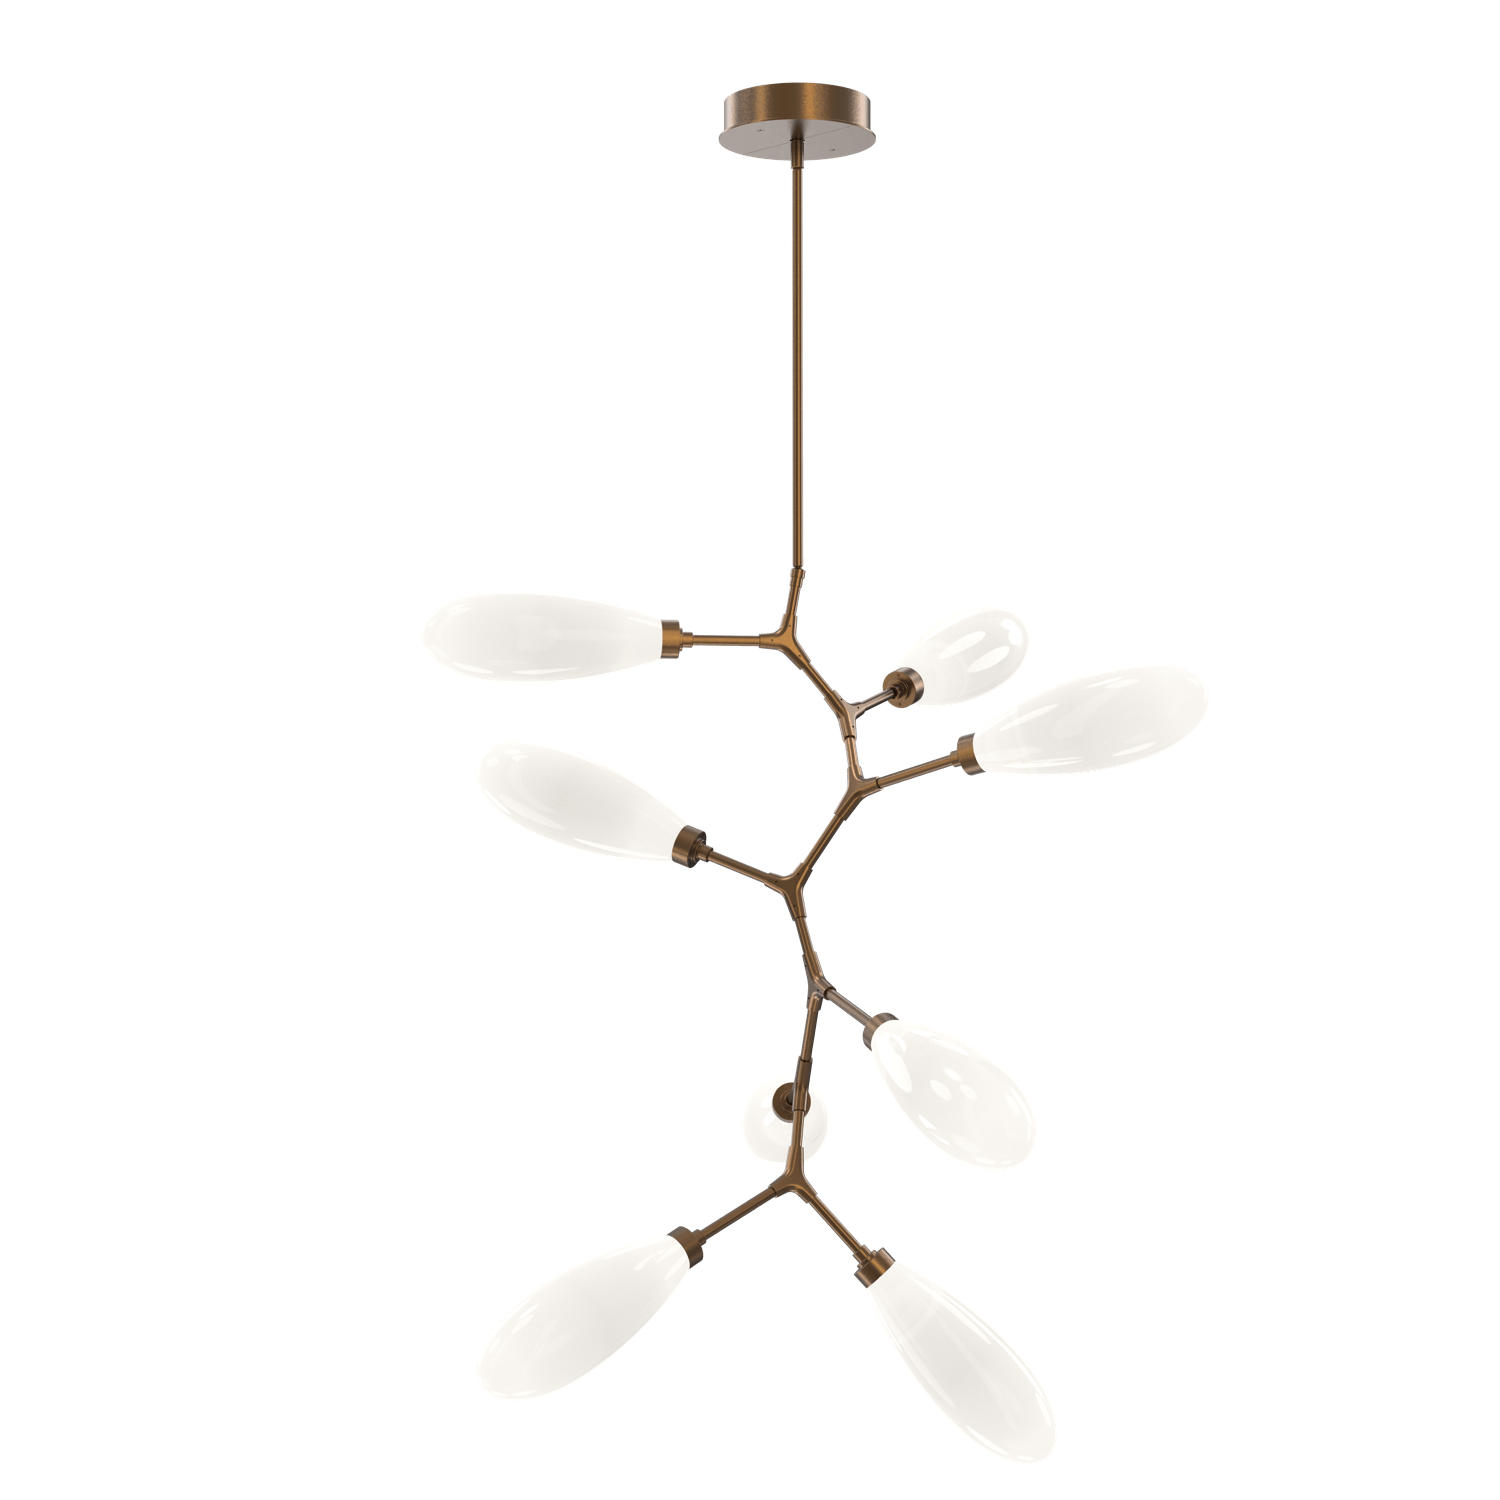 CHB0071-VB-FB-WL-LL-Hammerton-Studio-Fiori-8-light-organic-vine-chandelier-with-flat-bronze-finish-and-opal-white-glass-shades-and-LED-lamping